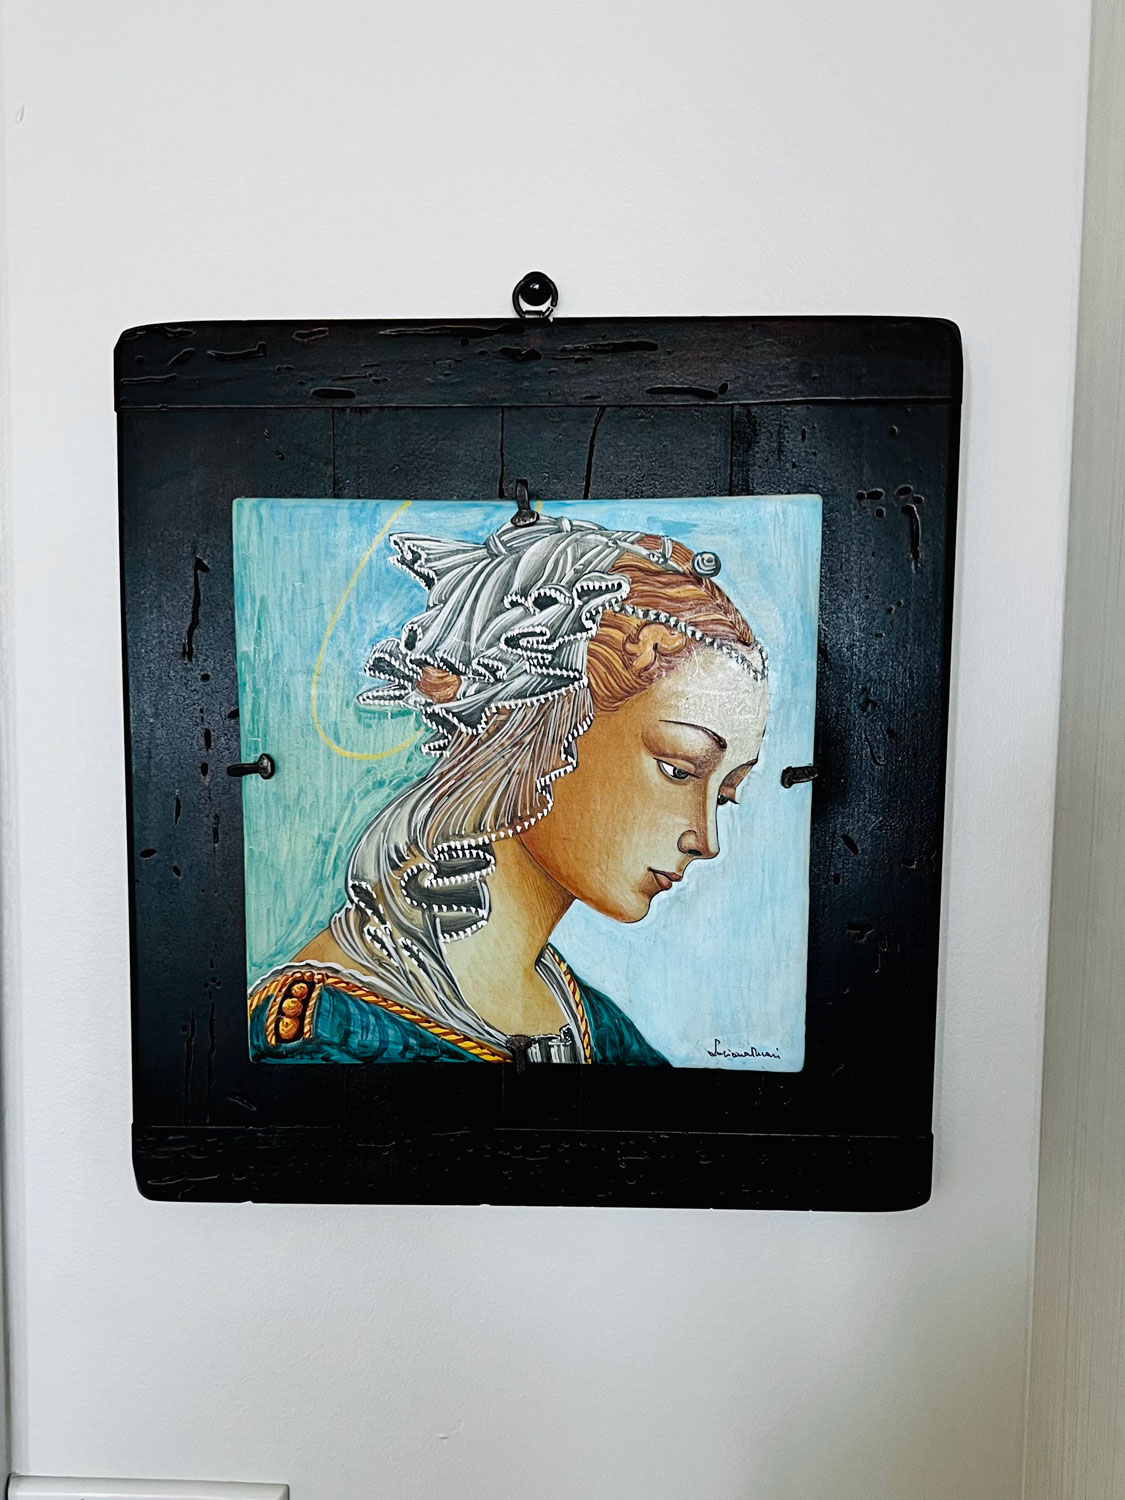 painted Italian tile of a Madonna